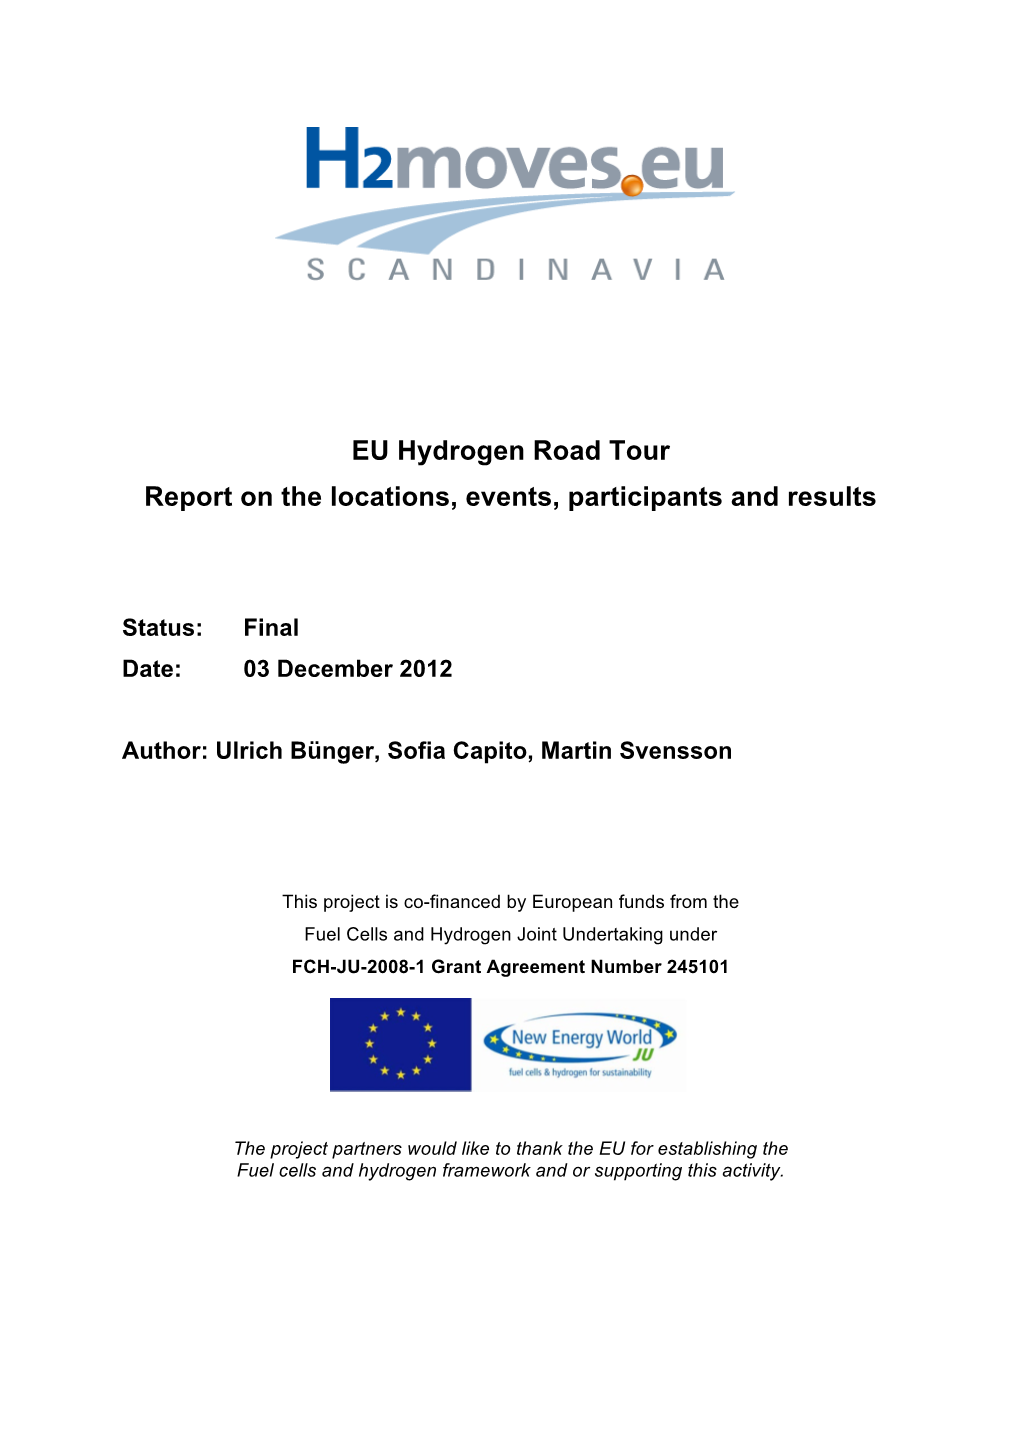 EU Hydrogen Road Tour Report on the Locations, Events, Participants and Results